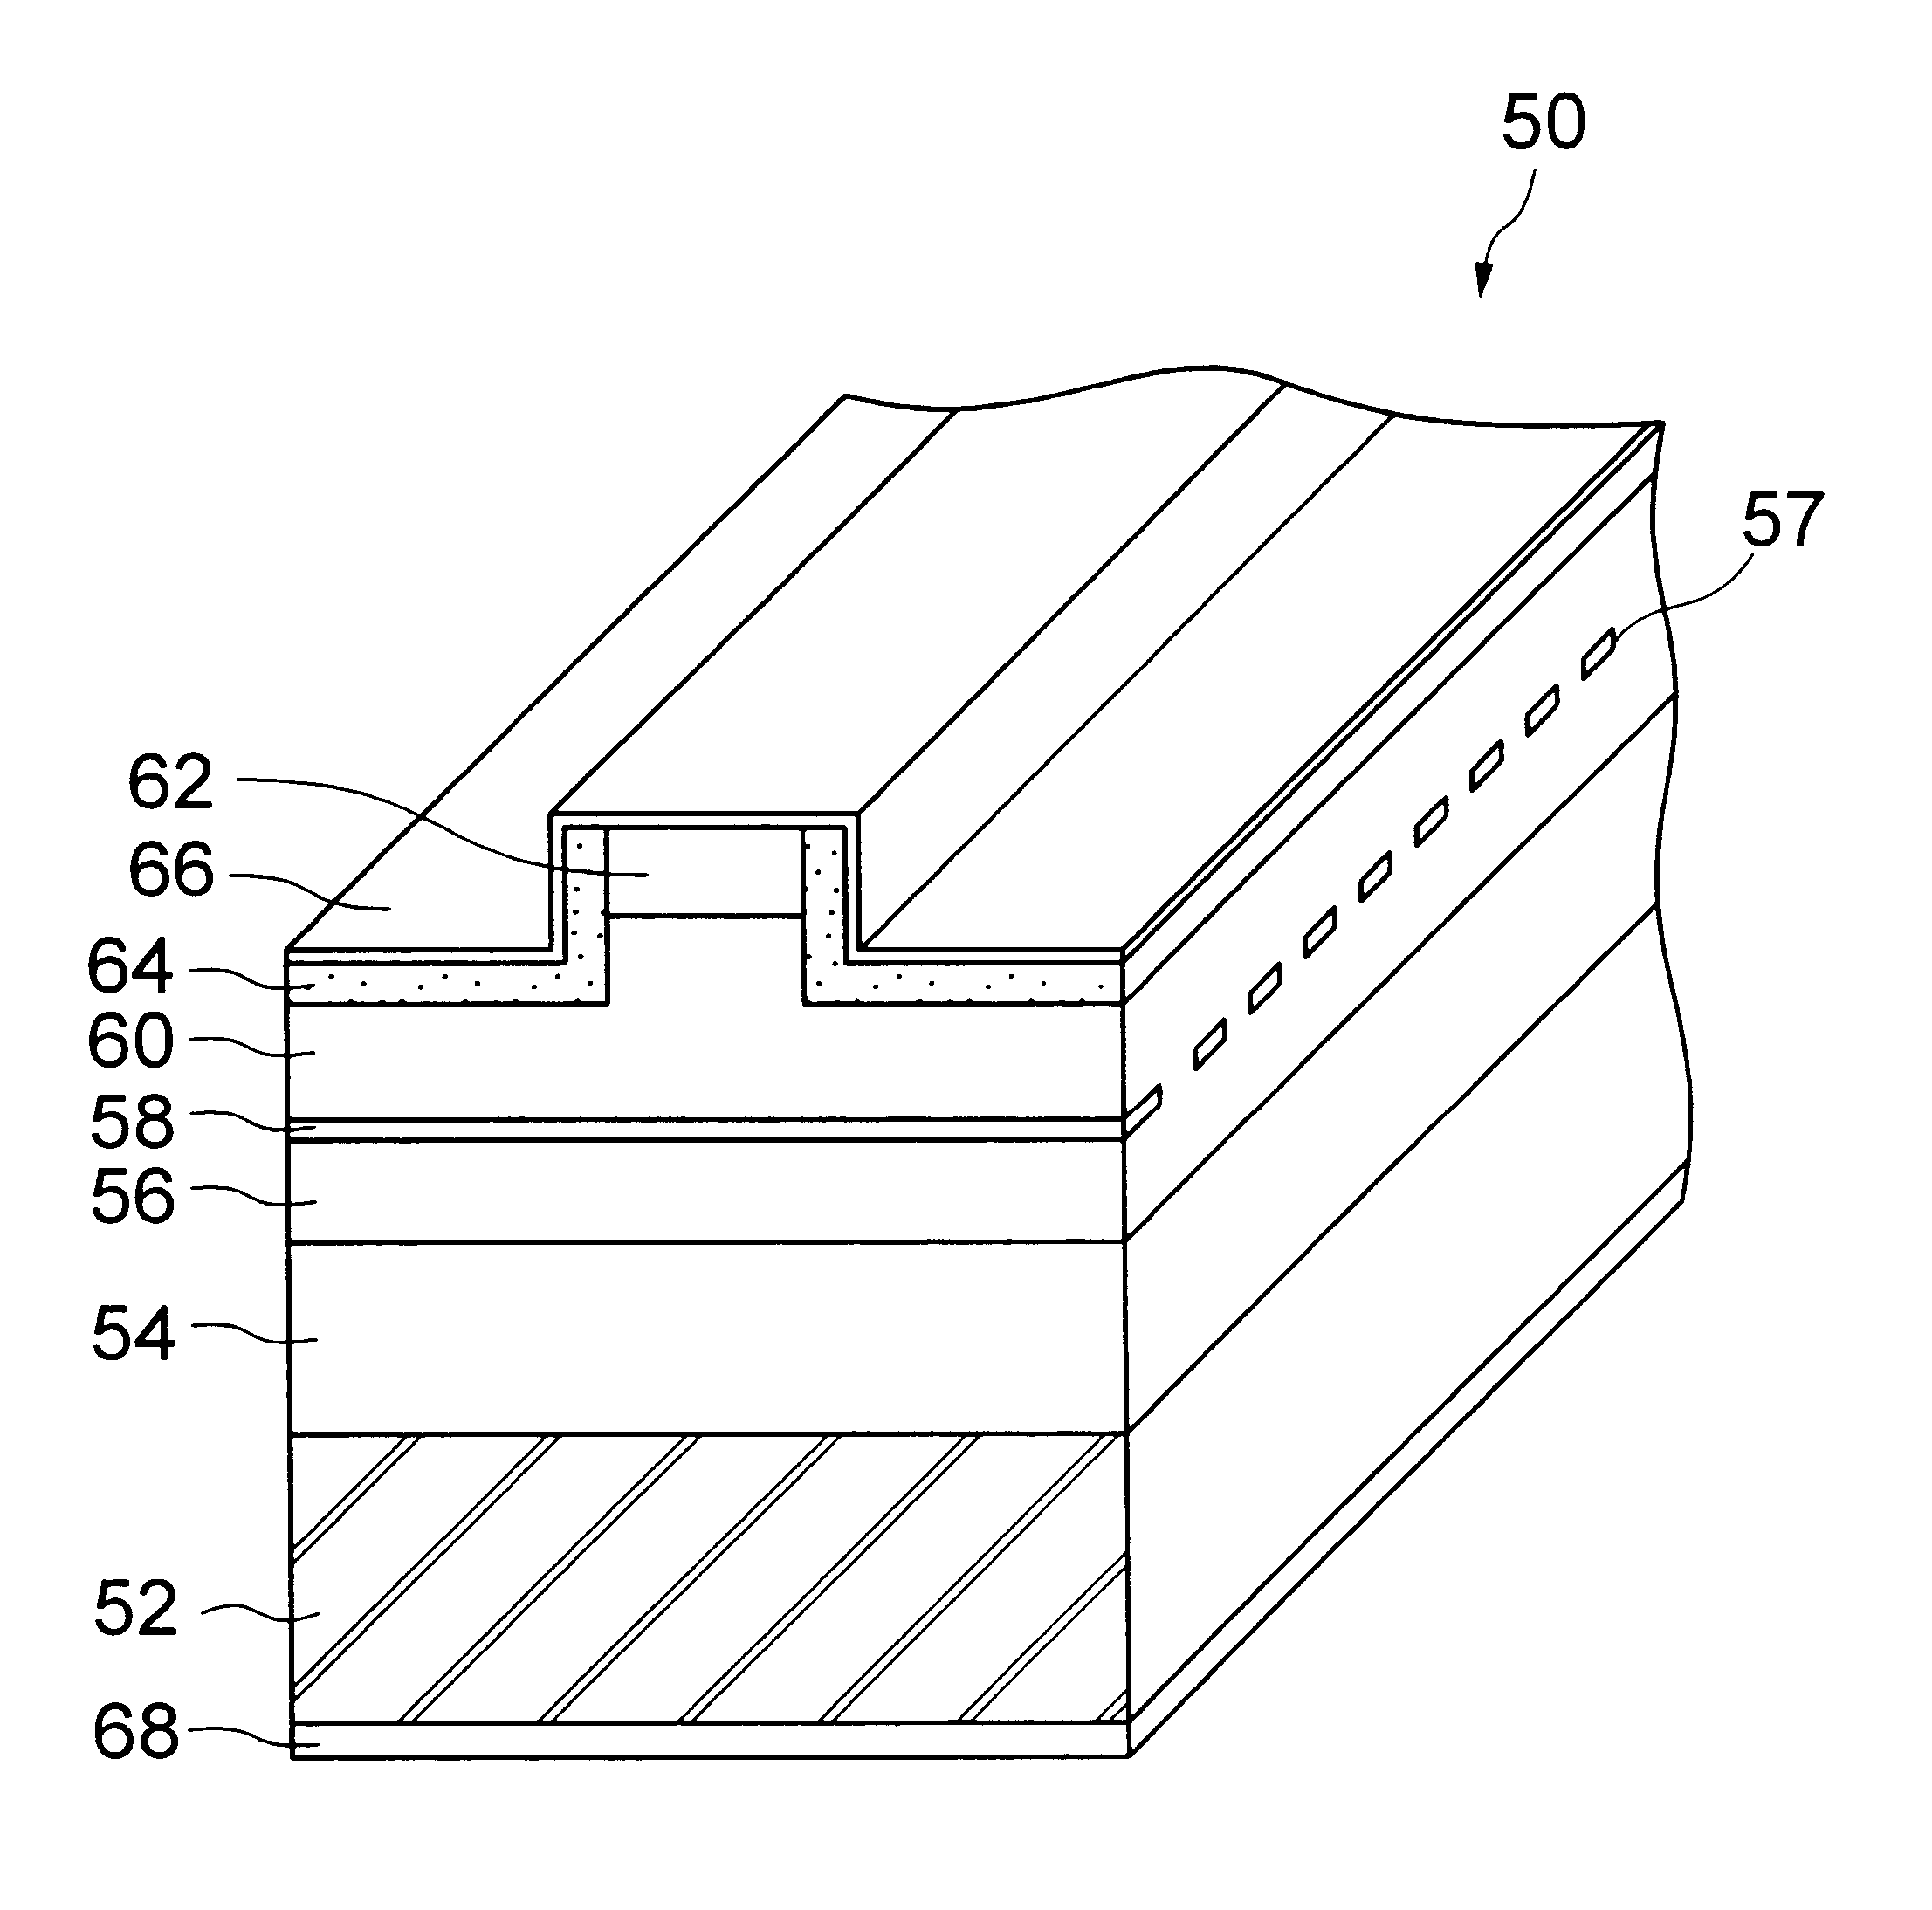 Distributed feedback semiconductor laser device